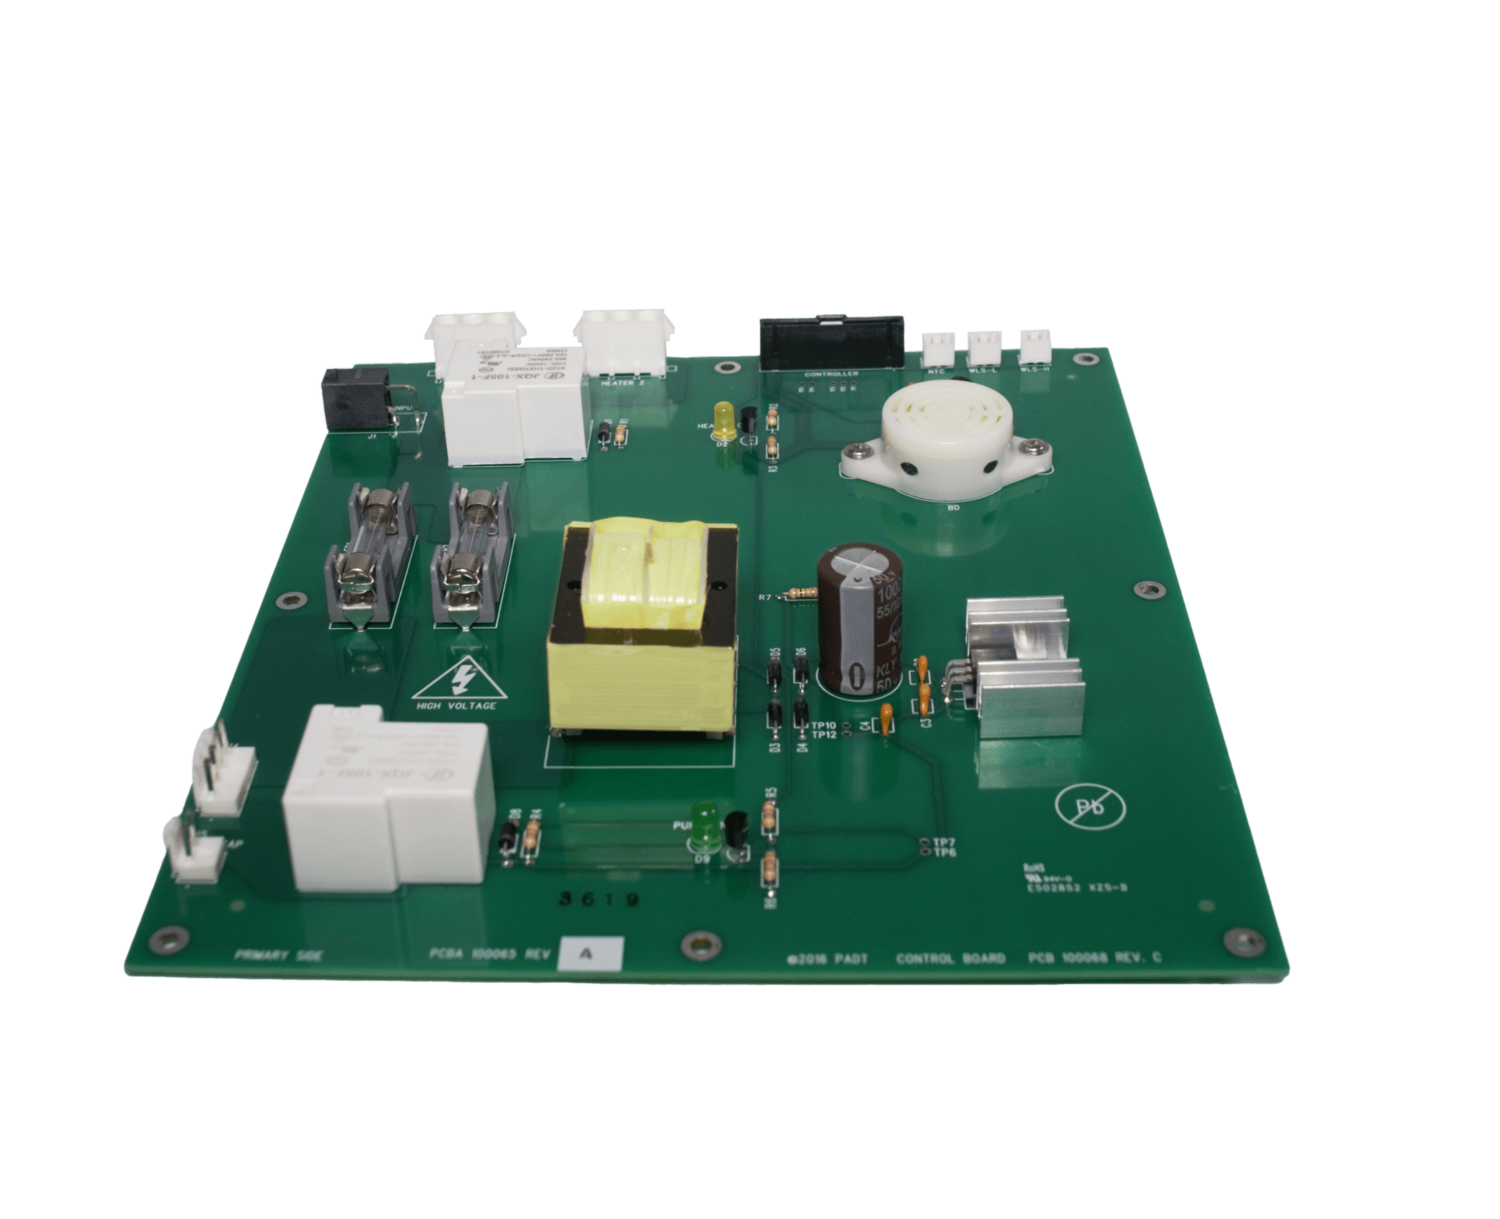 100065, PCB Assembly, sca3600